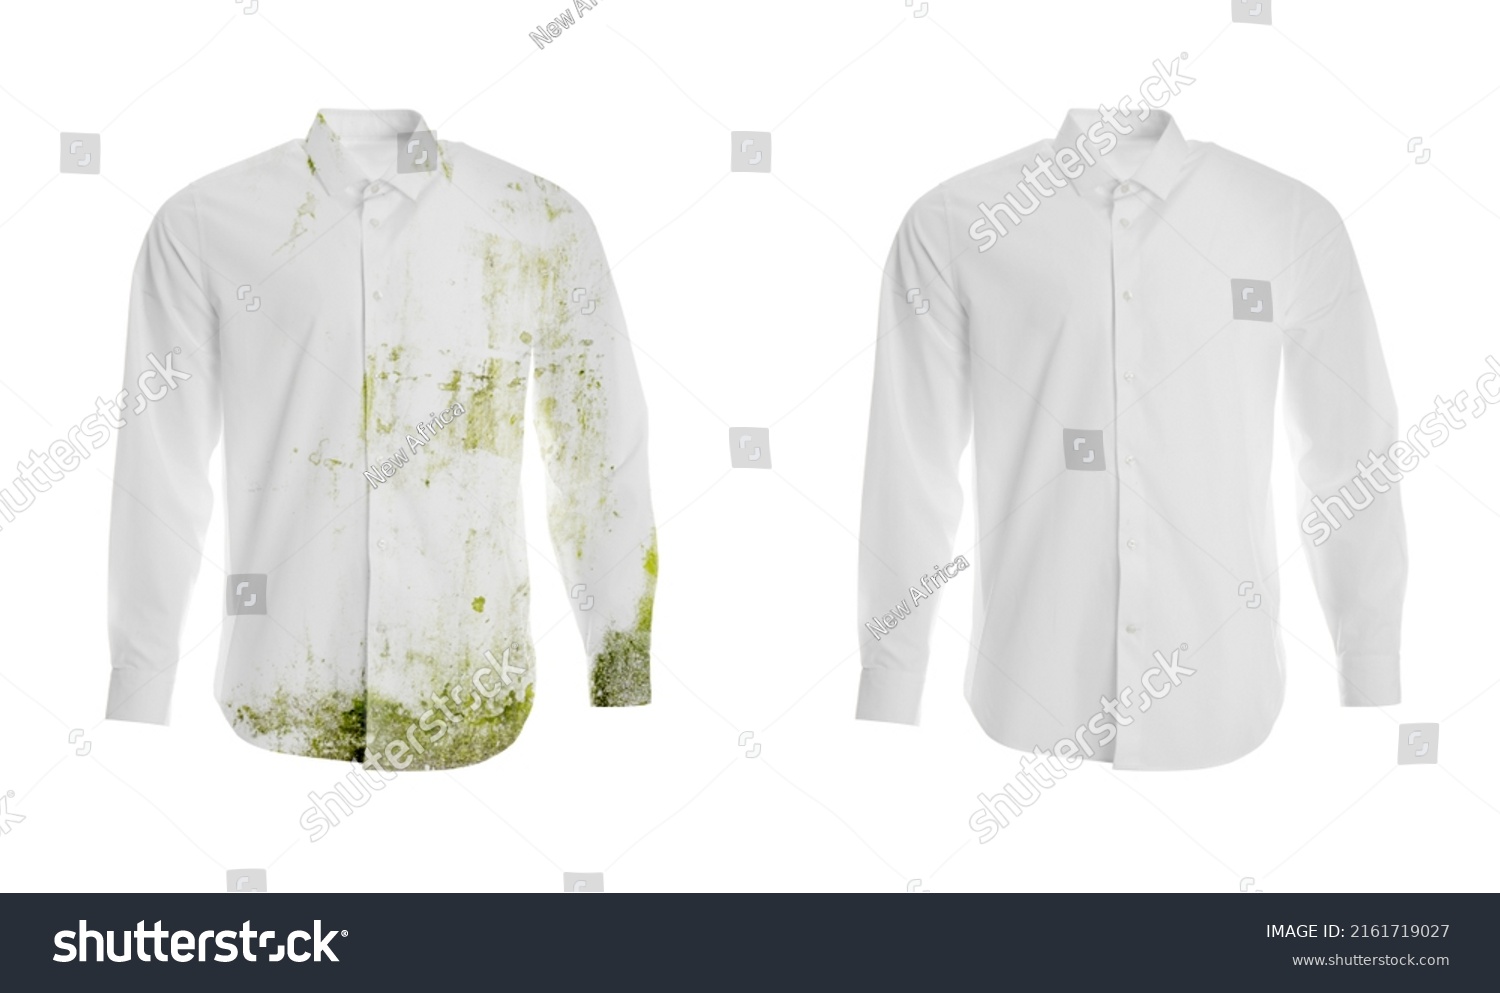 Stylish shirt before and after washing on white background, collage. Dry-cleaning service #2161719027